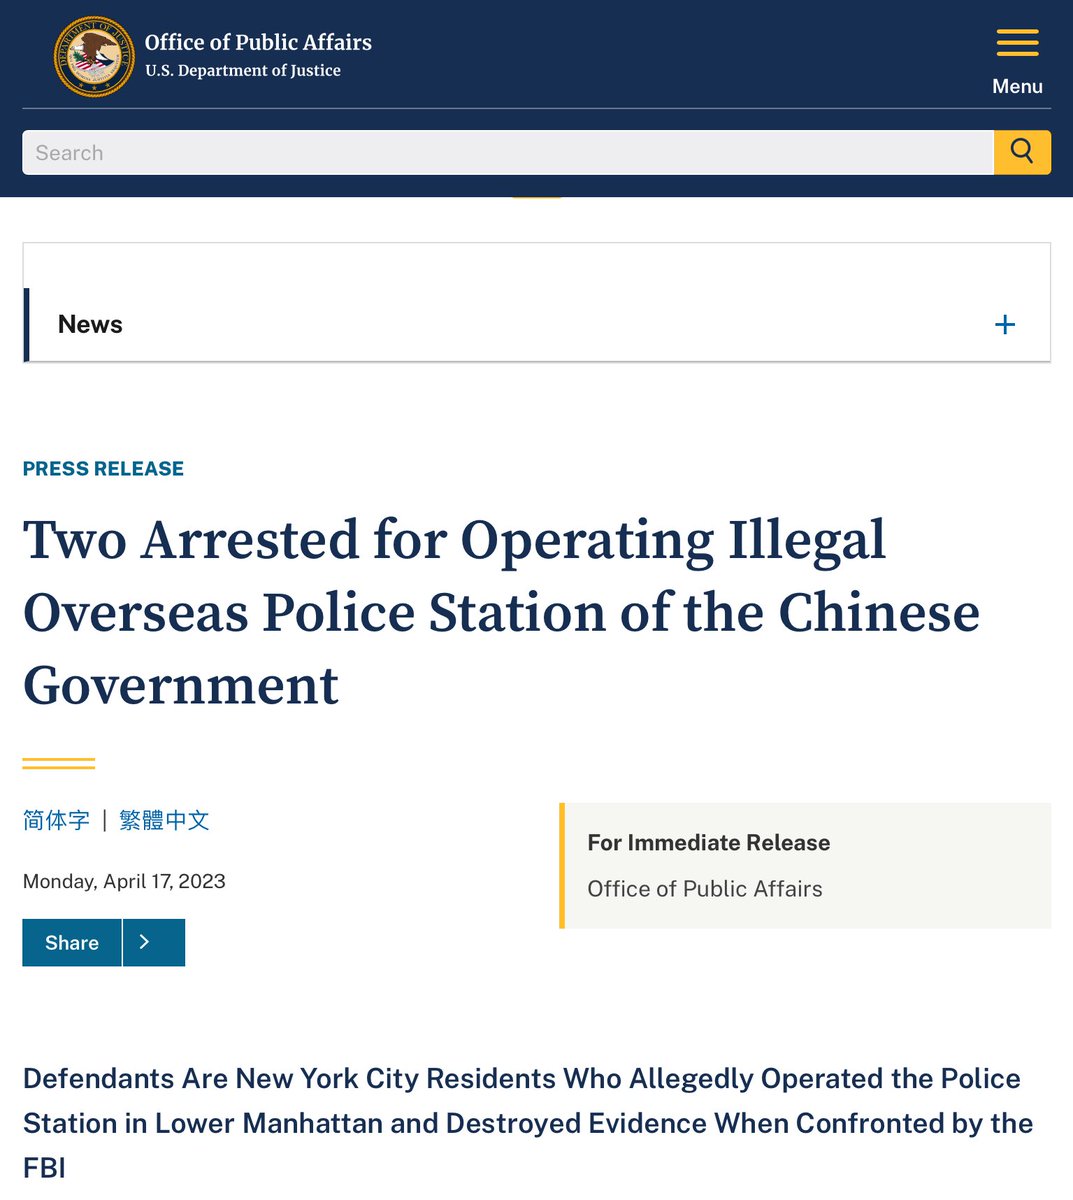 If China was able to operate a Chinese police station within Manhattan, NYC, they can DEFINITELY swarm an area as “students” in another. It’s all about CH control.